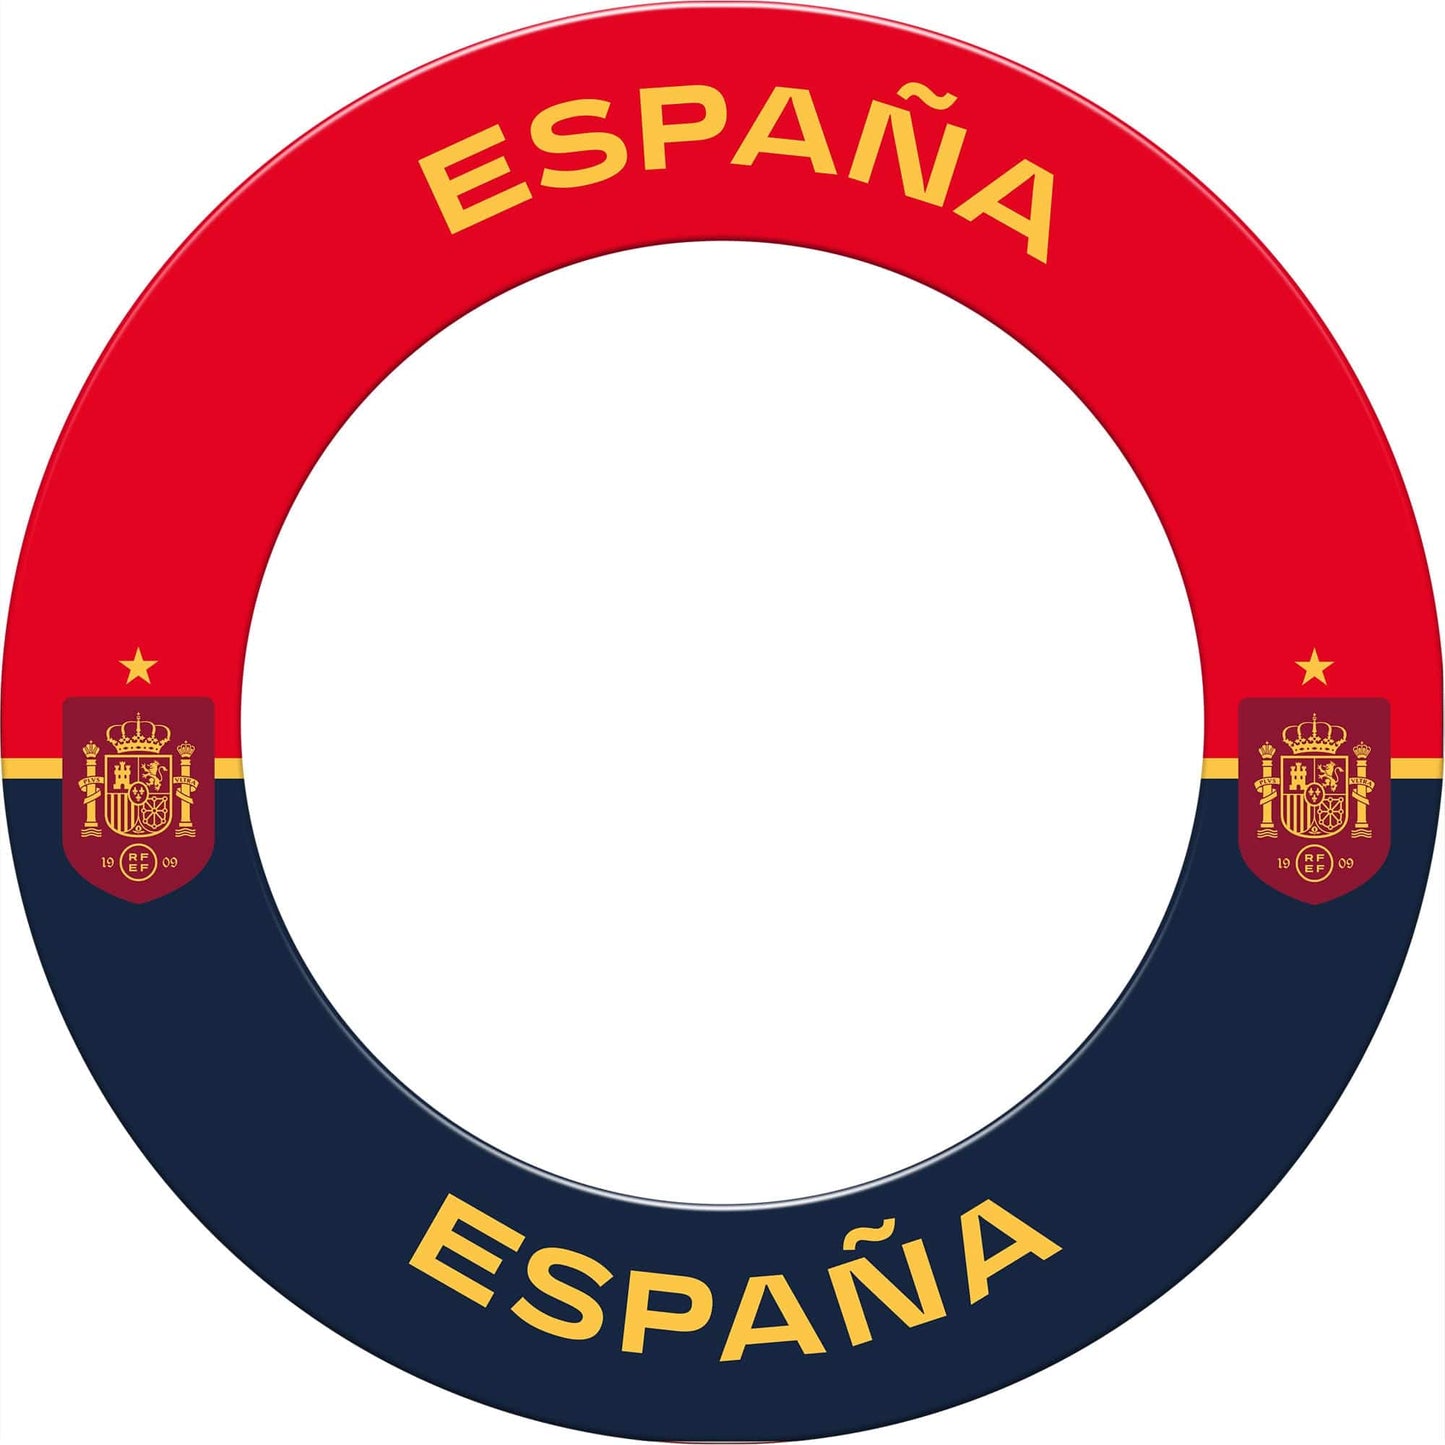 Espana Football Dartboard Surround - Official Licensed - S4 - Spain - Blue & Red